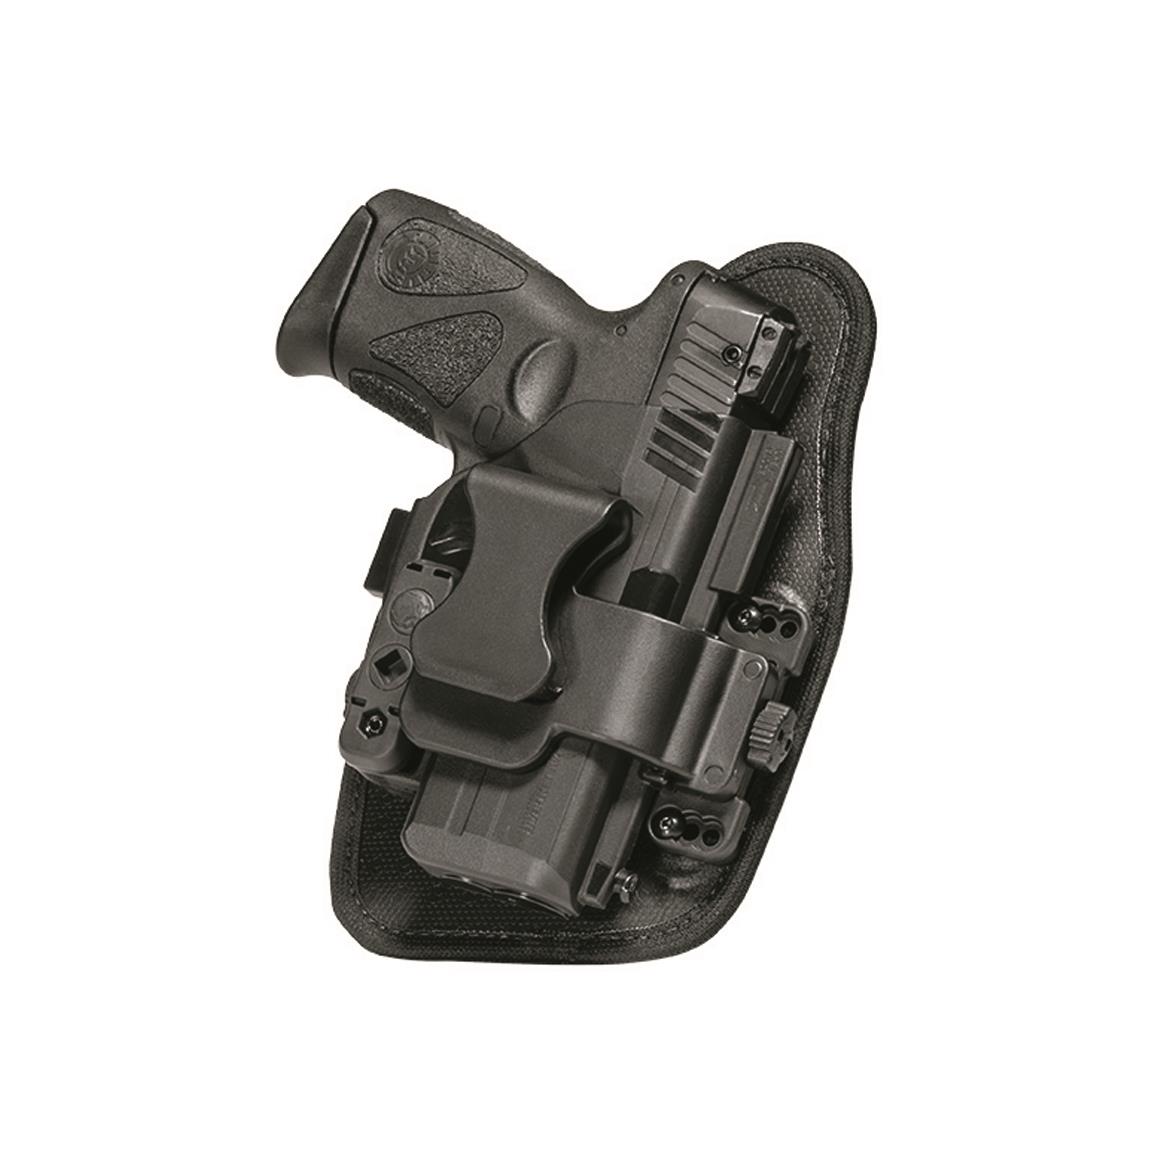 Alien Gear ShapeShift Appendix Carry Holster, Smith & Wesson M&P9 Shield 2.0